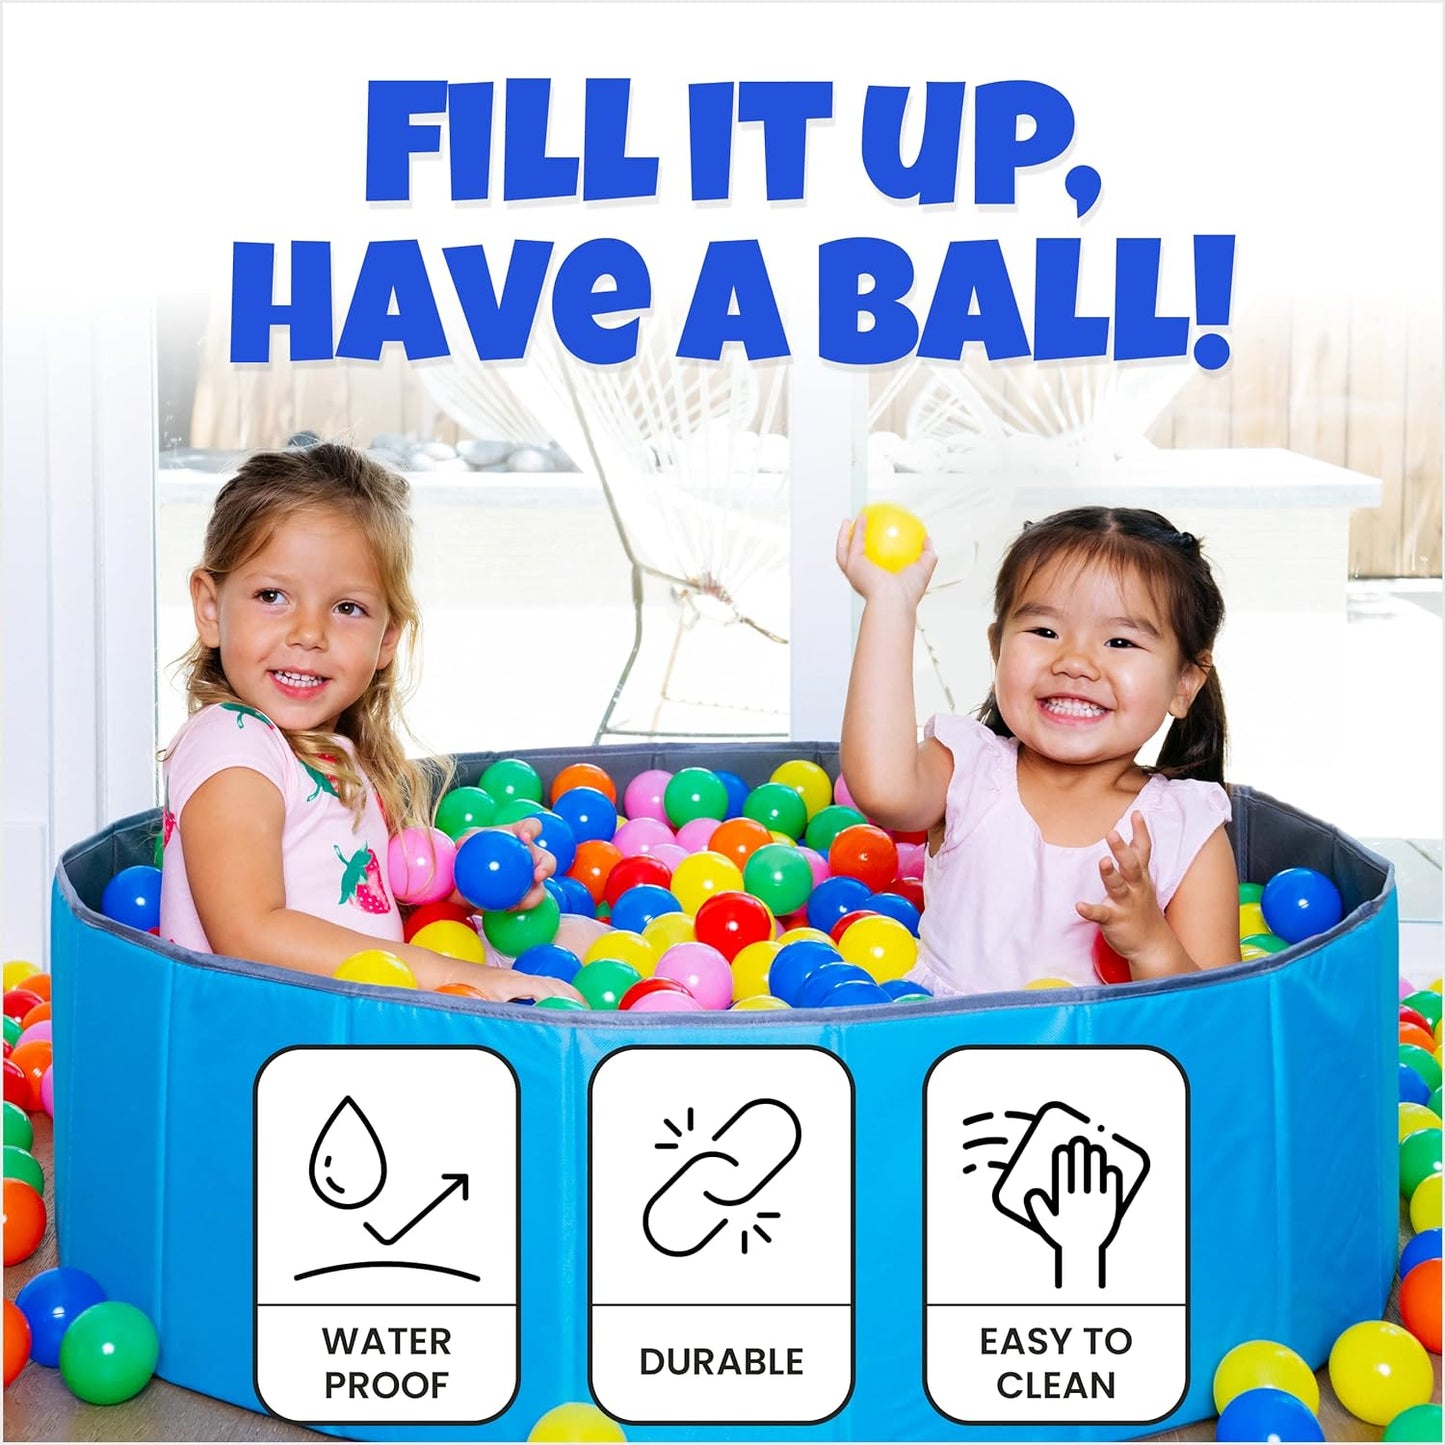 Ball Pit for Toddlers and Kids, Holds over 400 Balls, Soft, Foldable, Reusable Storage Bag Is Included, for Indoor or Outdoor Use, Blue